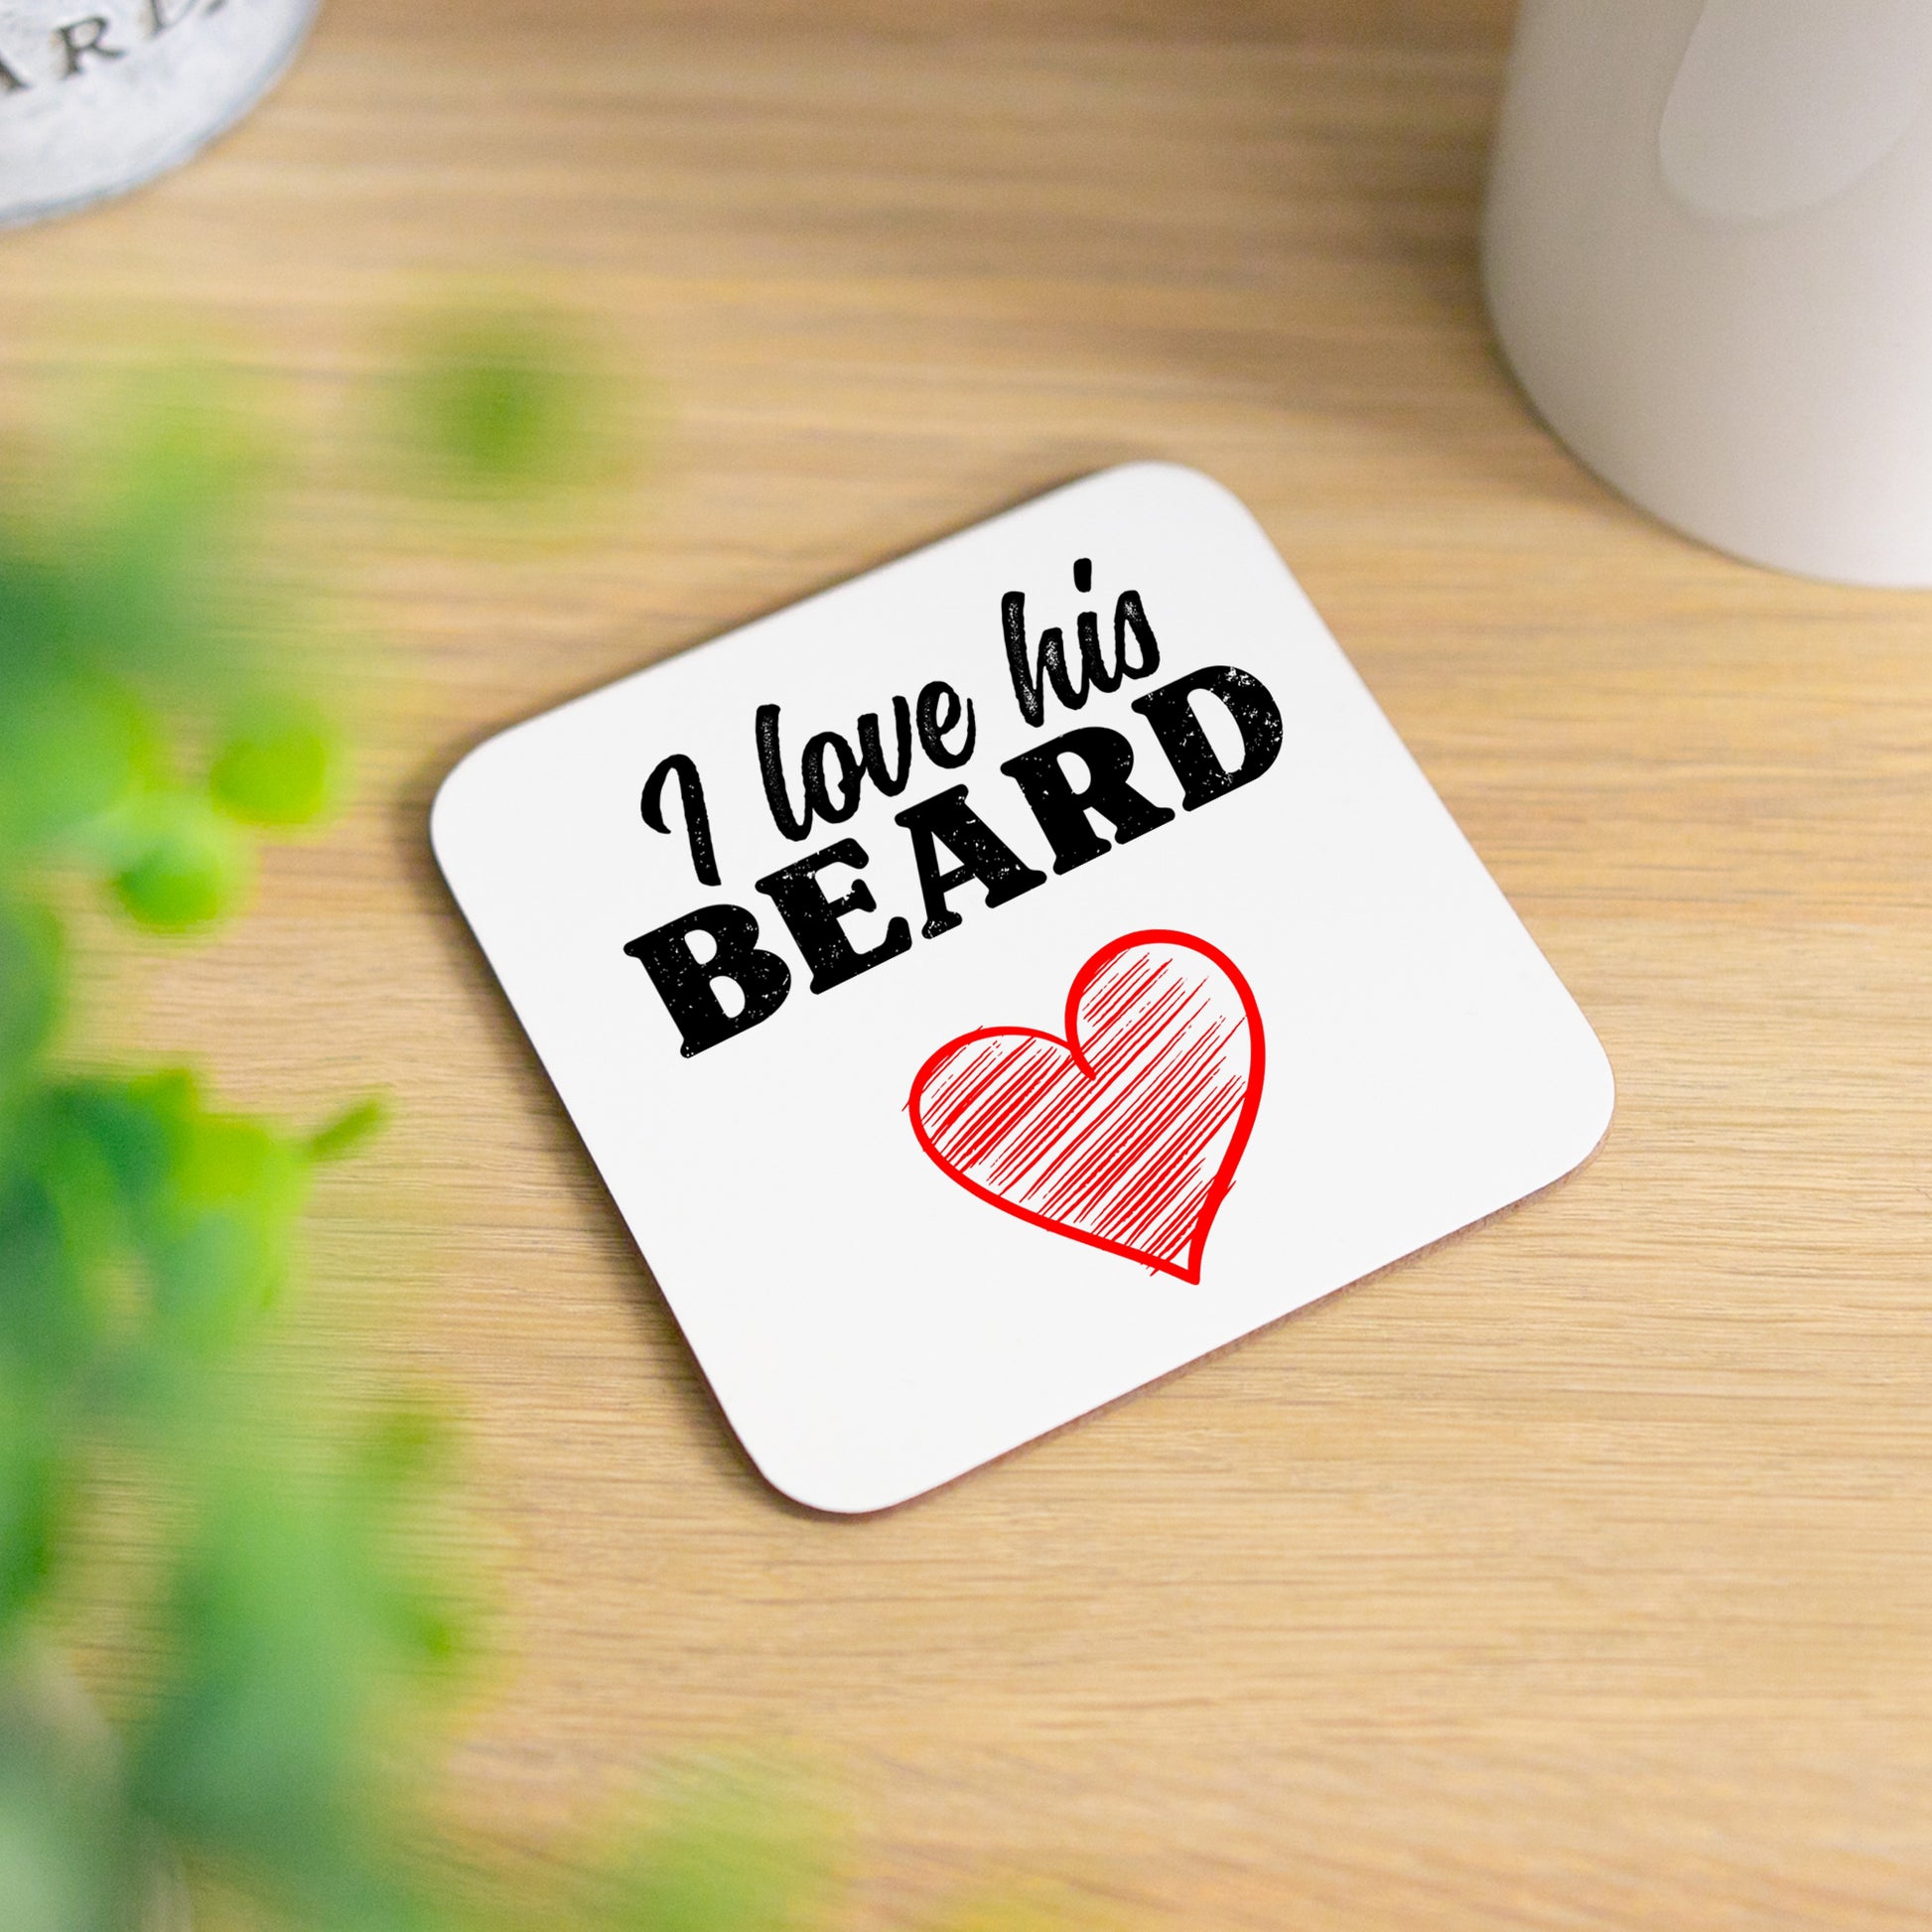 I Love His Beard / Her Butt Mug and/or Coaster Gift  - Always Looking Good - I Love His Beard Coaster Only  